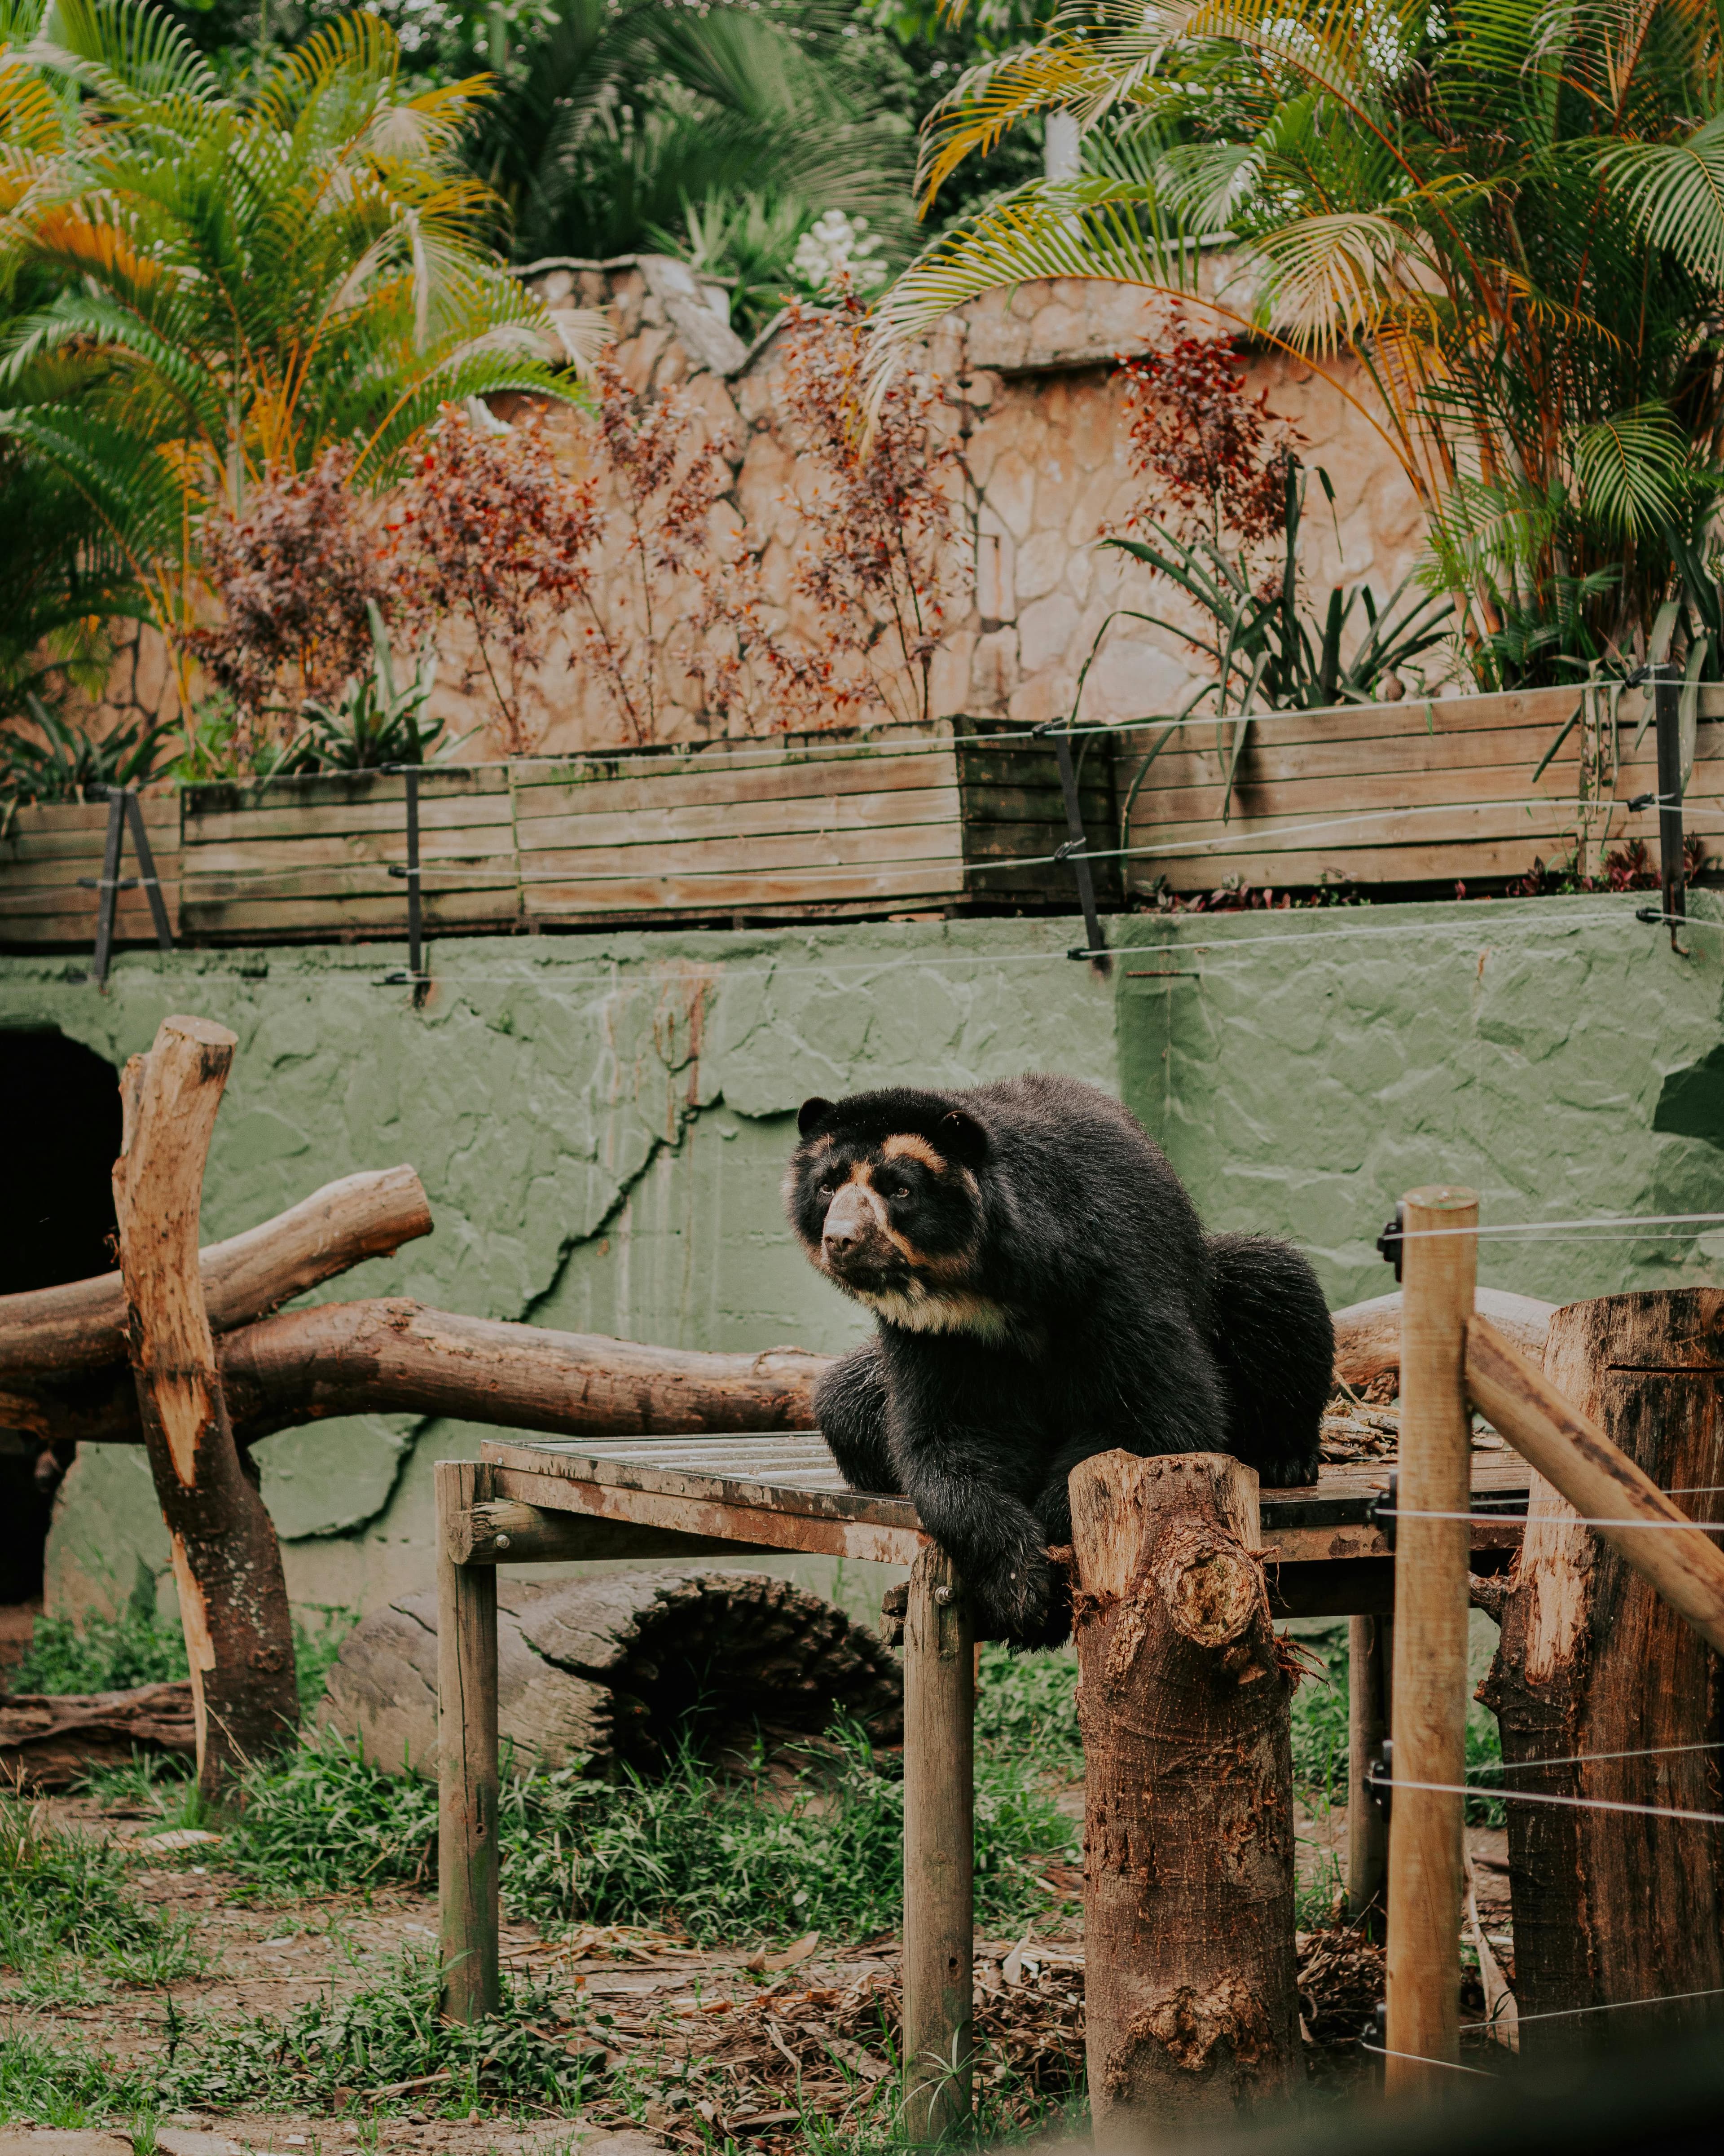 A spectacled bear sits on wooden logs in a green enclosure with lush vegetation in the background.